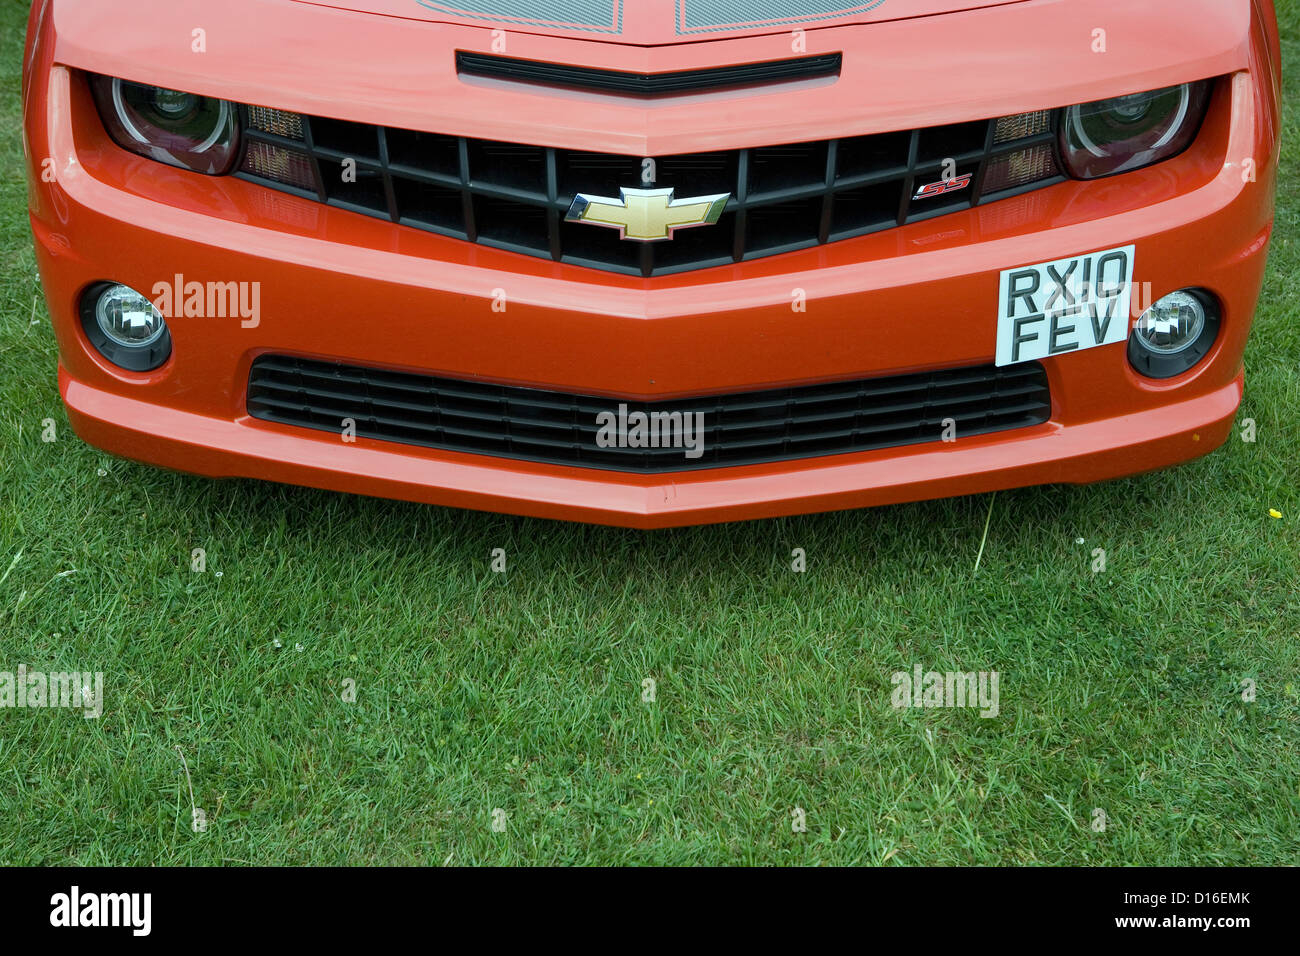 The front of an orange modern Chevrolet muscle car. Stock Photo